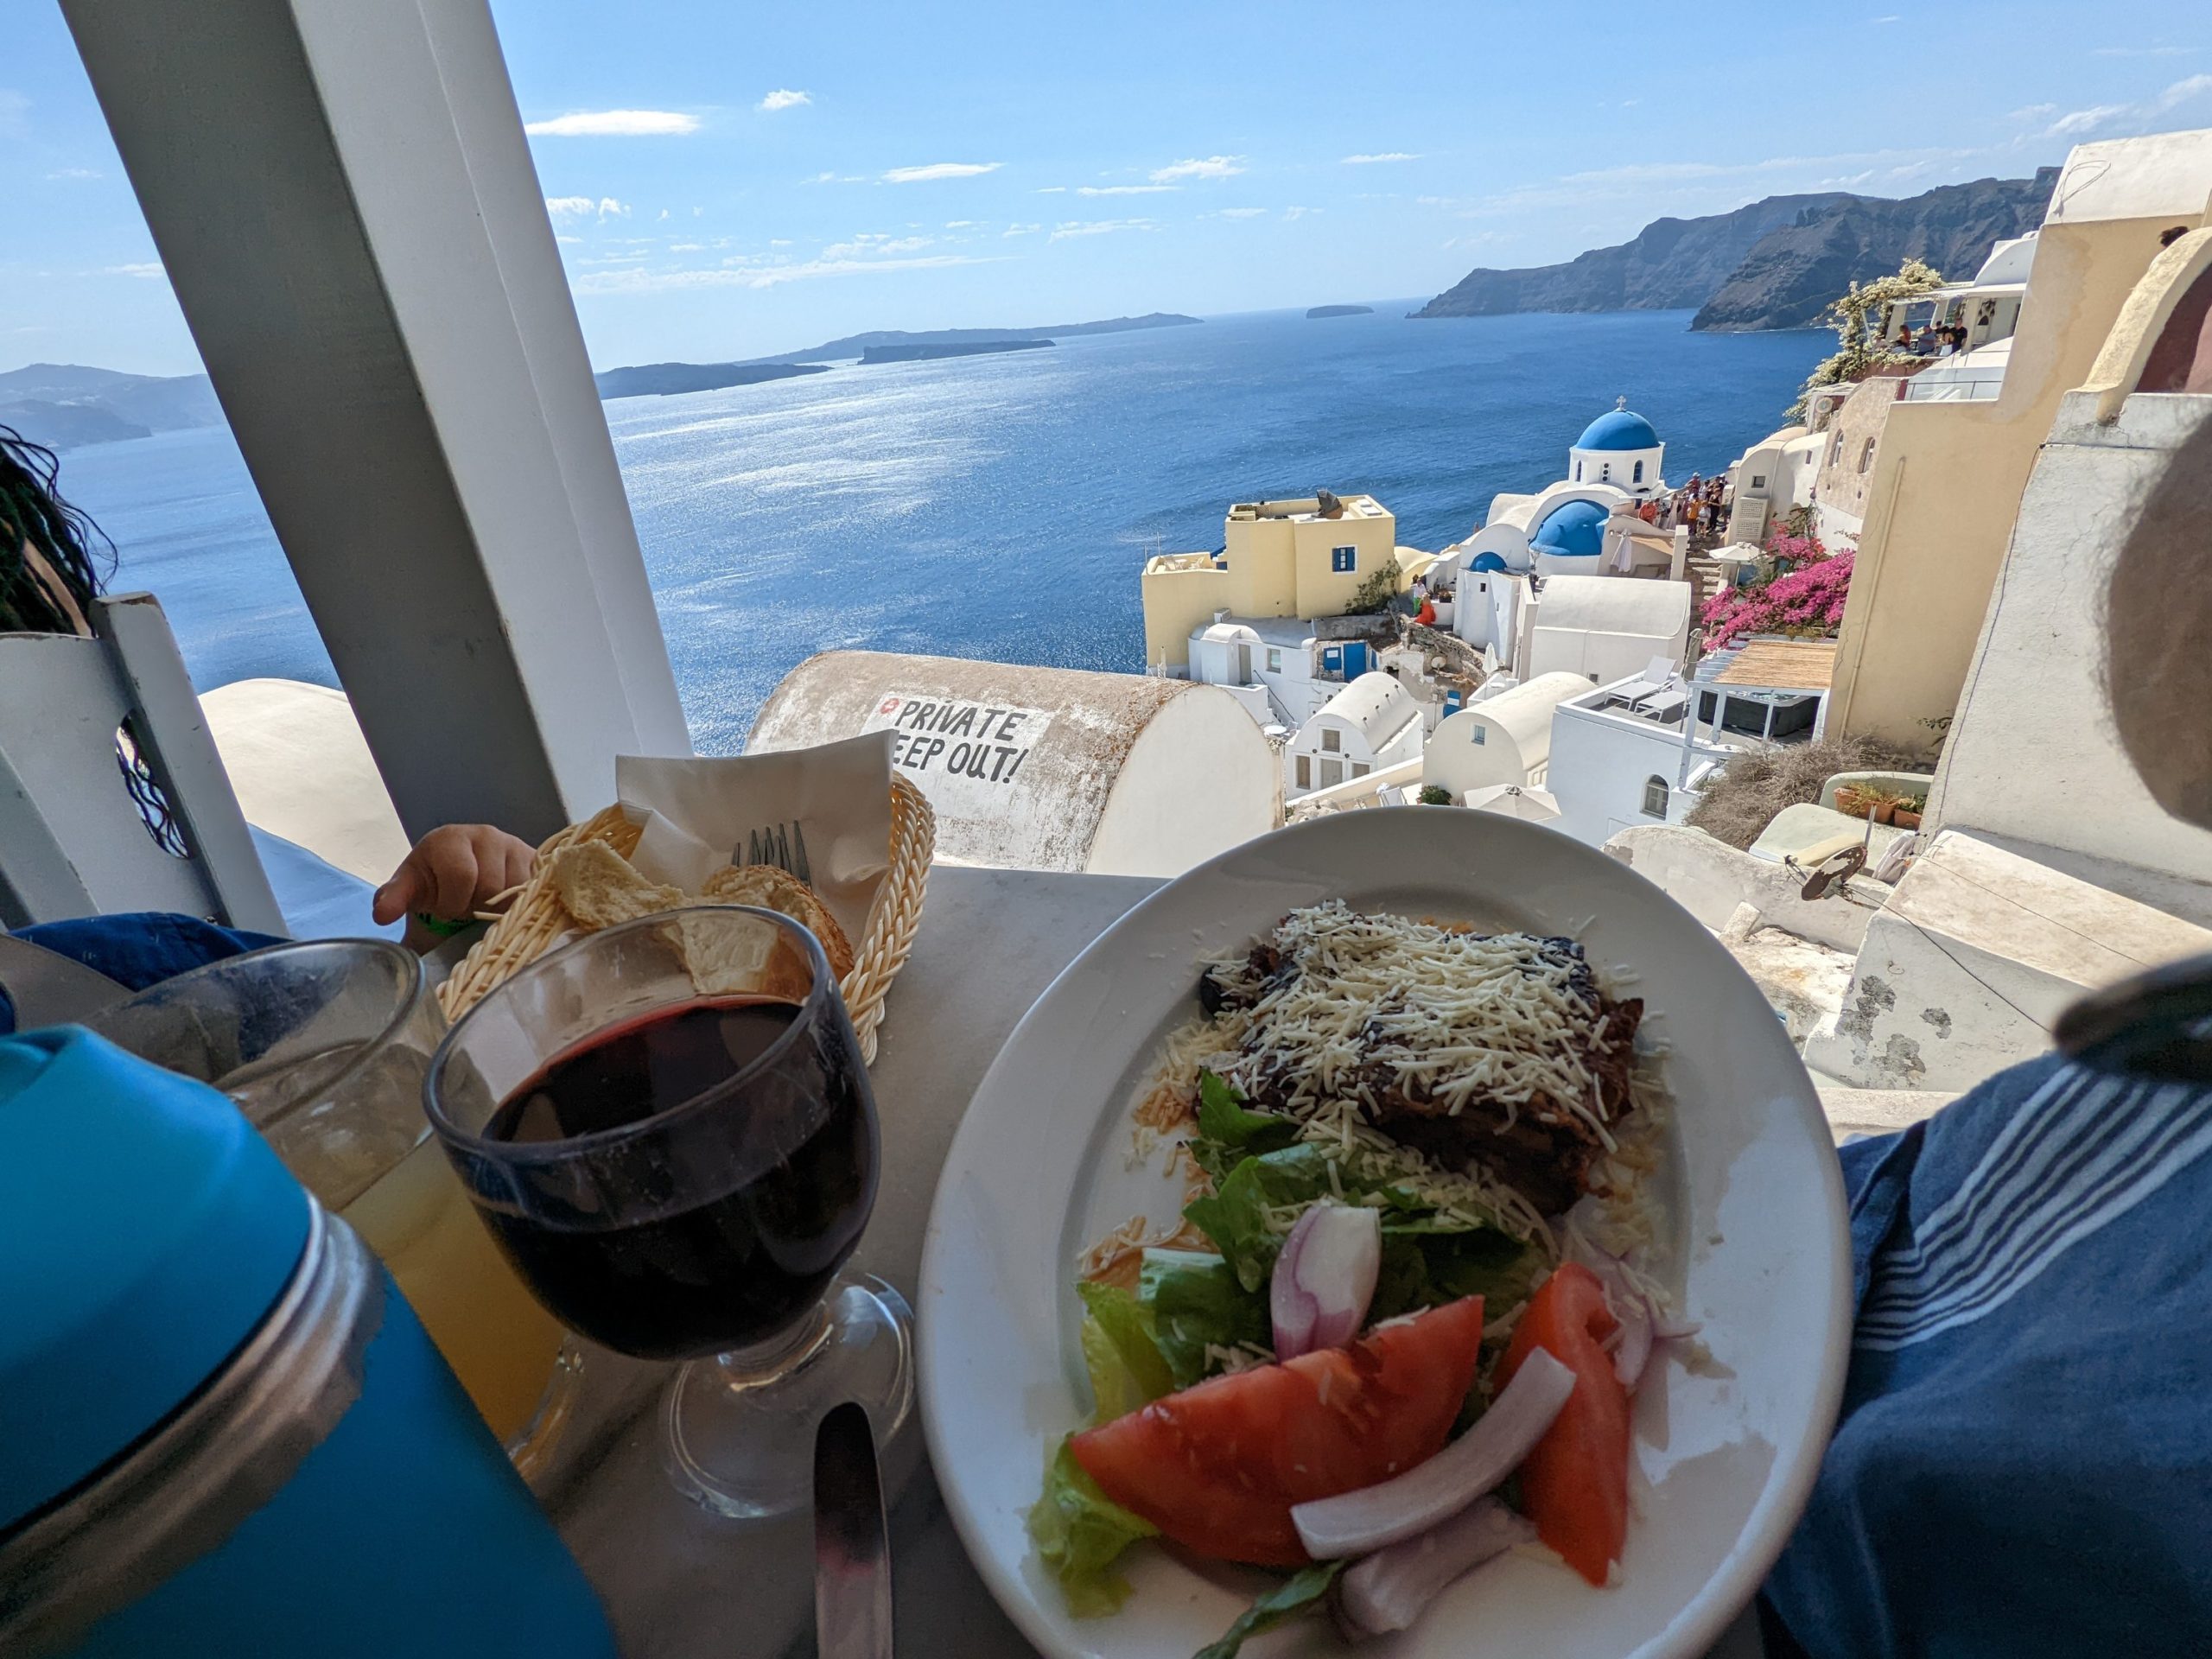 a plate of food and a glass of wine on a table overlooking a body of water